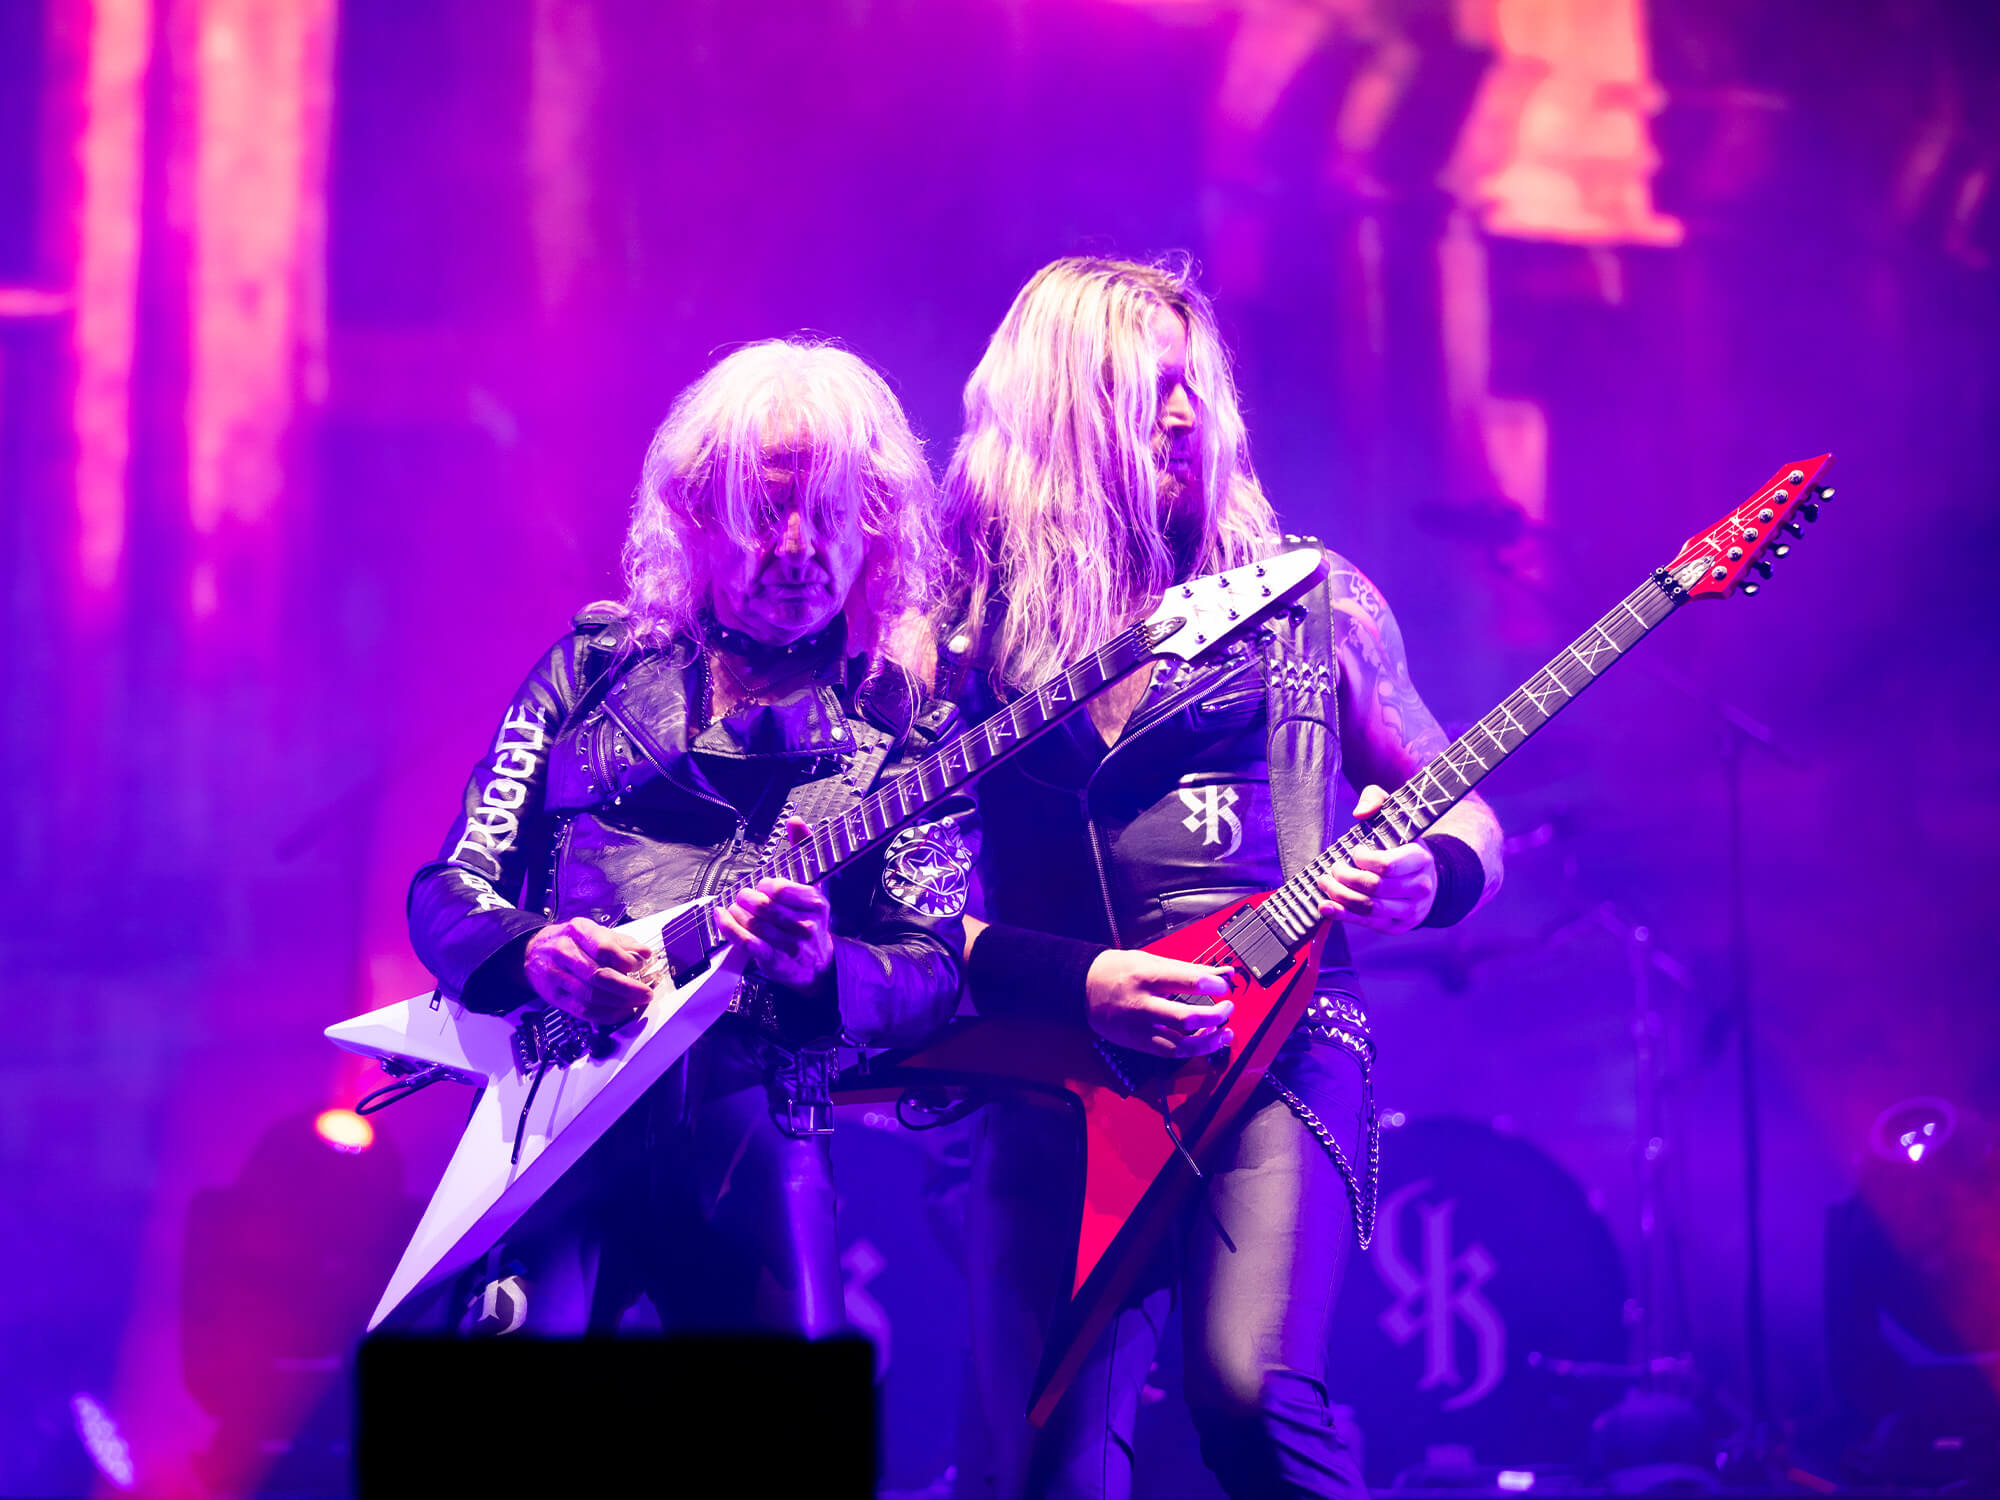 KK Downing and AJ Mills stood together playing guitar on stage